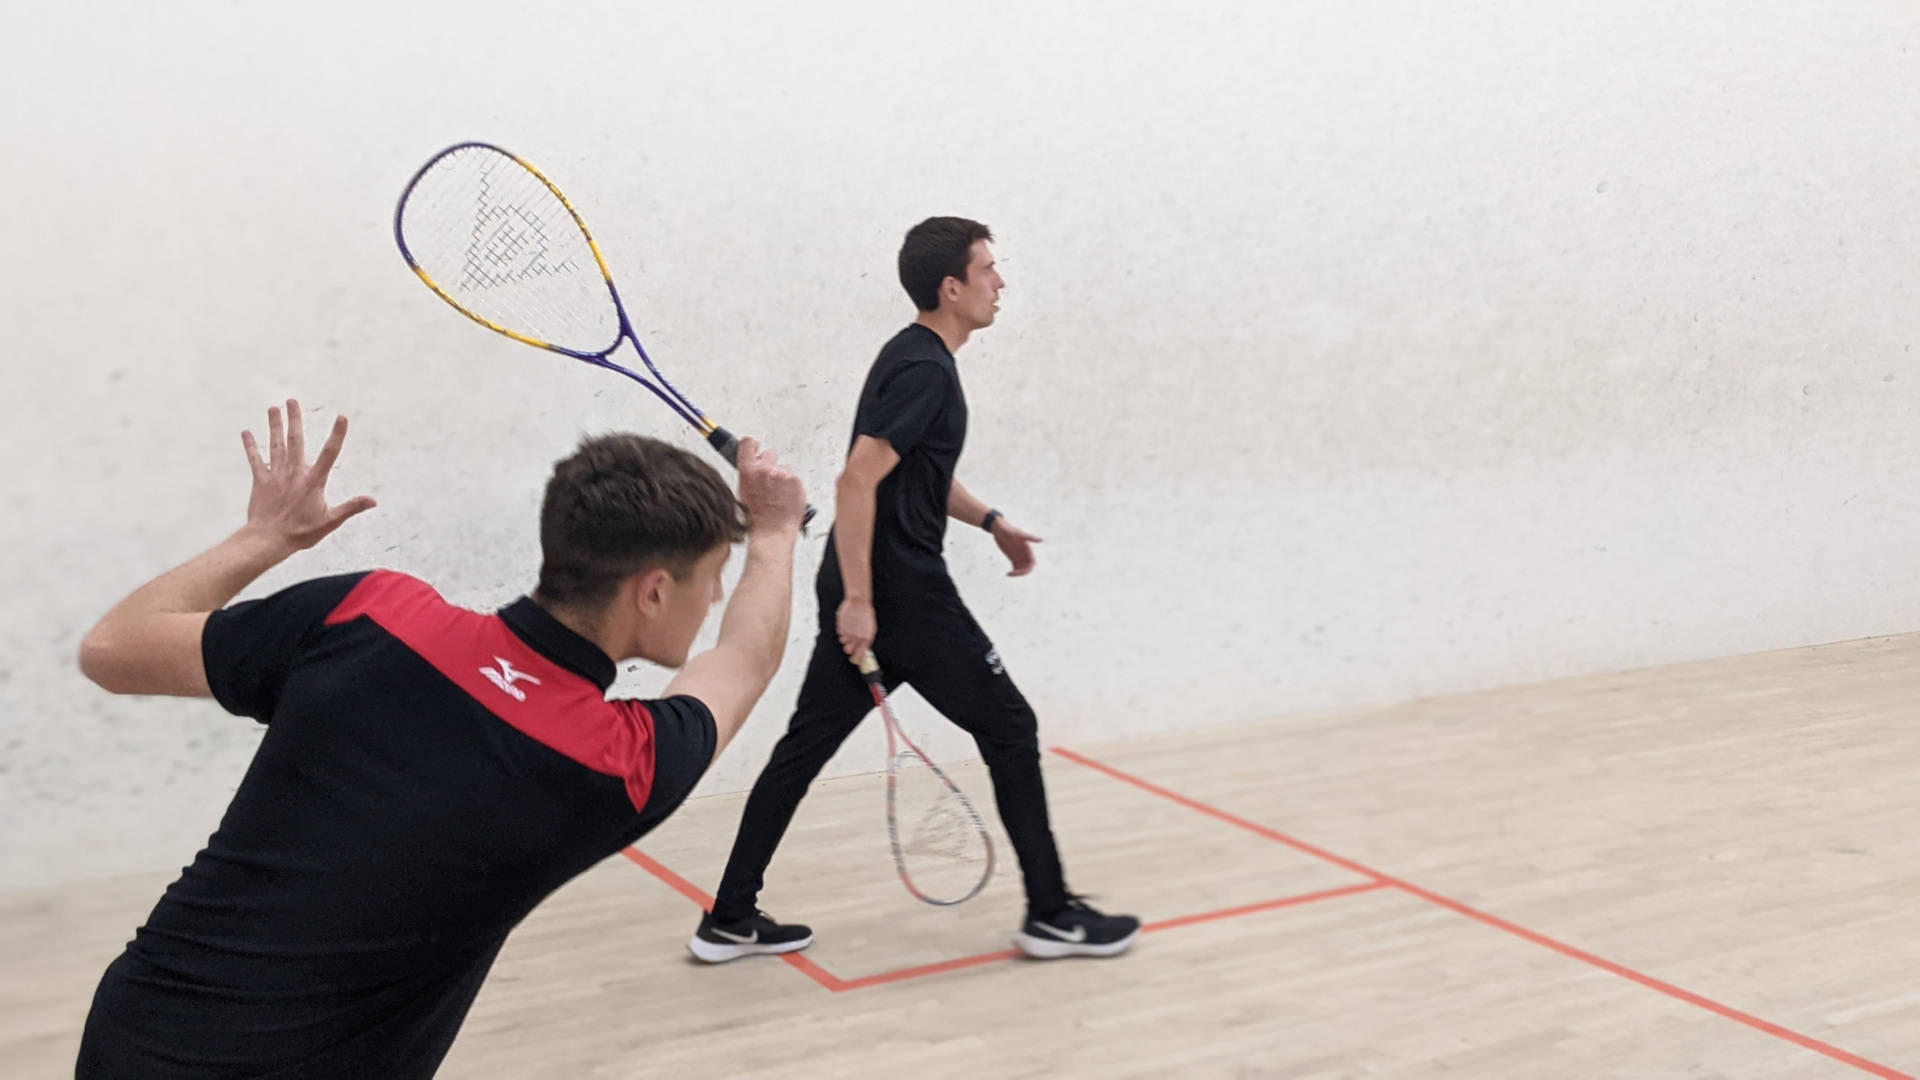 Two Men In Squash Court Background